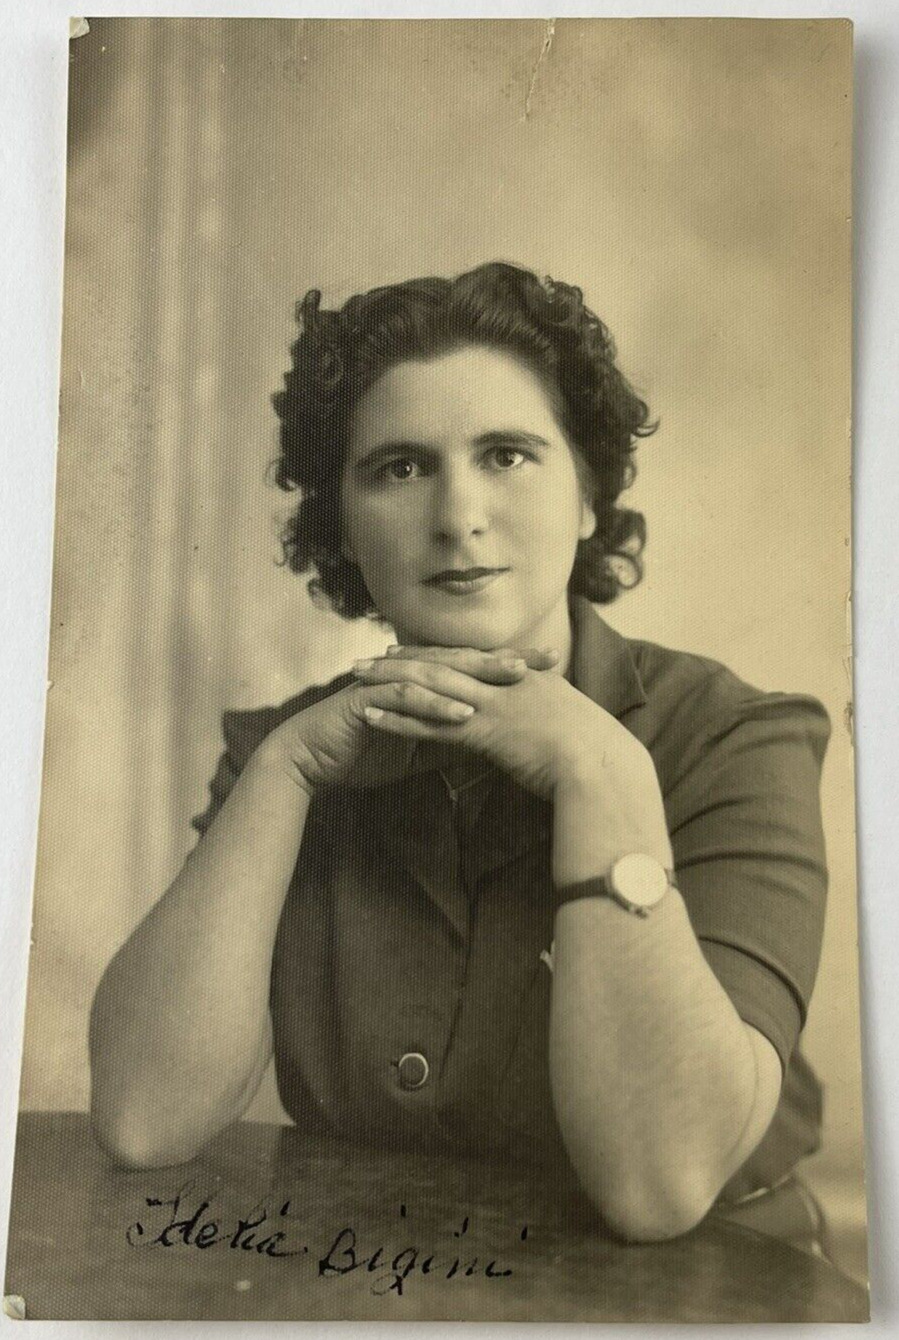 1945 Posted Postcard from Italy Woman Lady Idelia Biagini Black & White RPPC